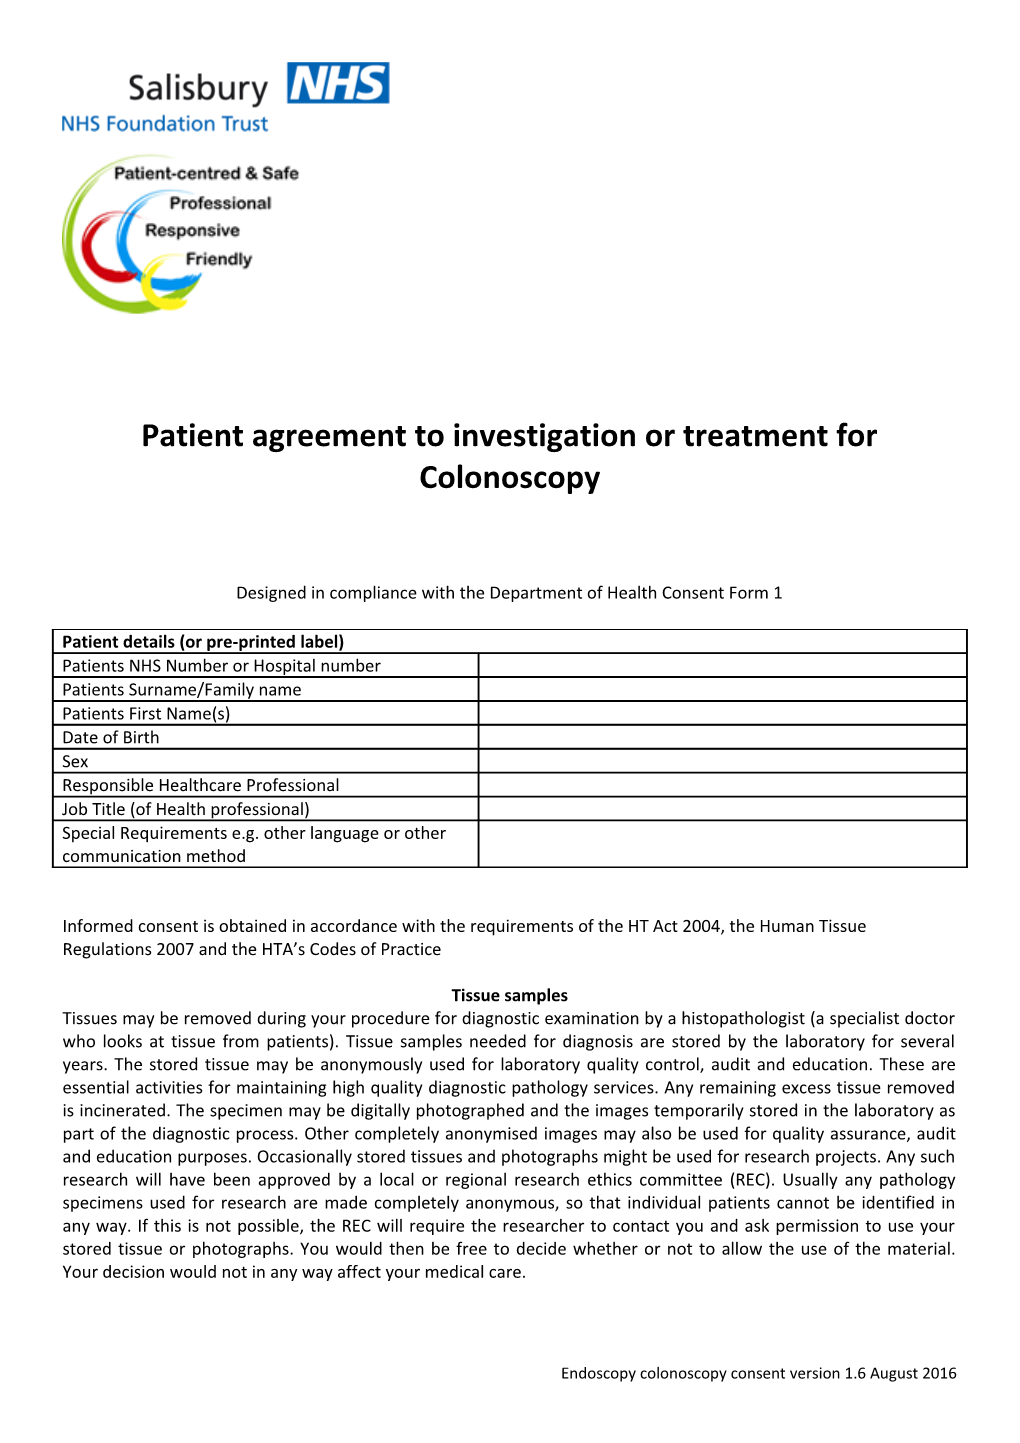 Patient Agreement to Investigation Or Treatment for Colonoscopy